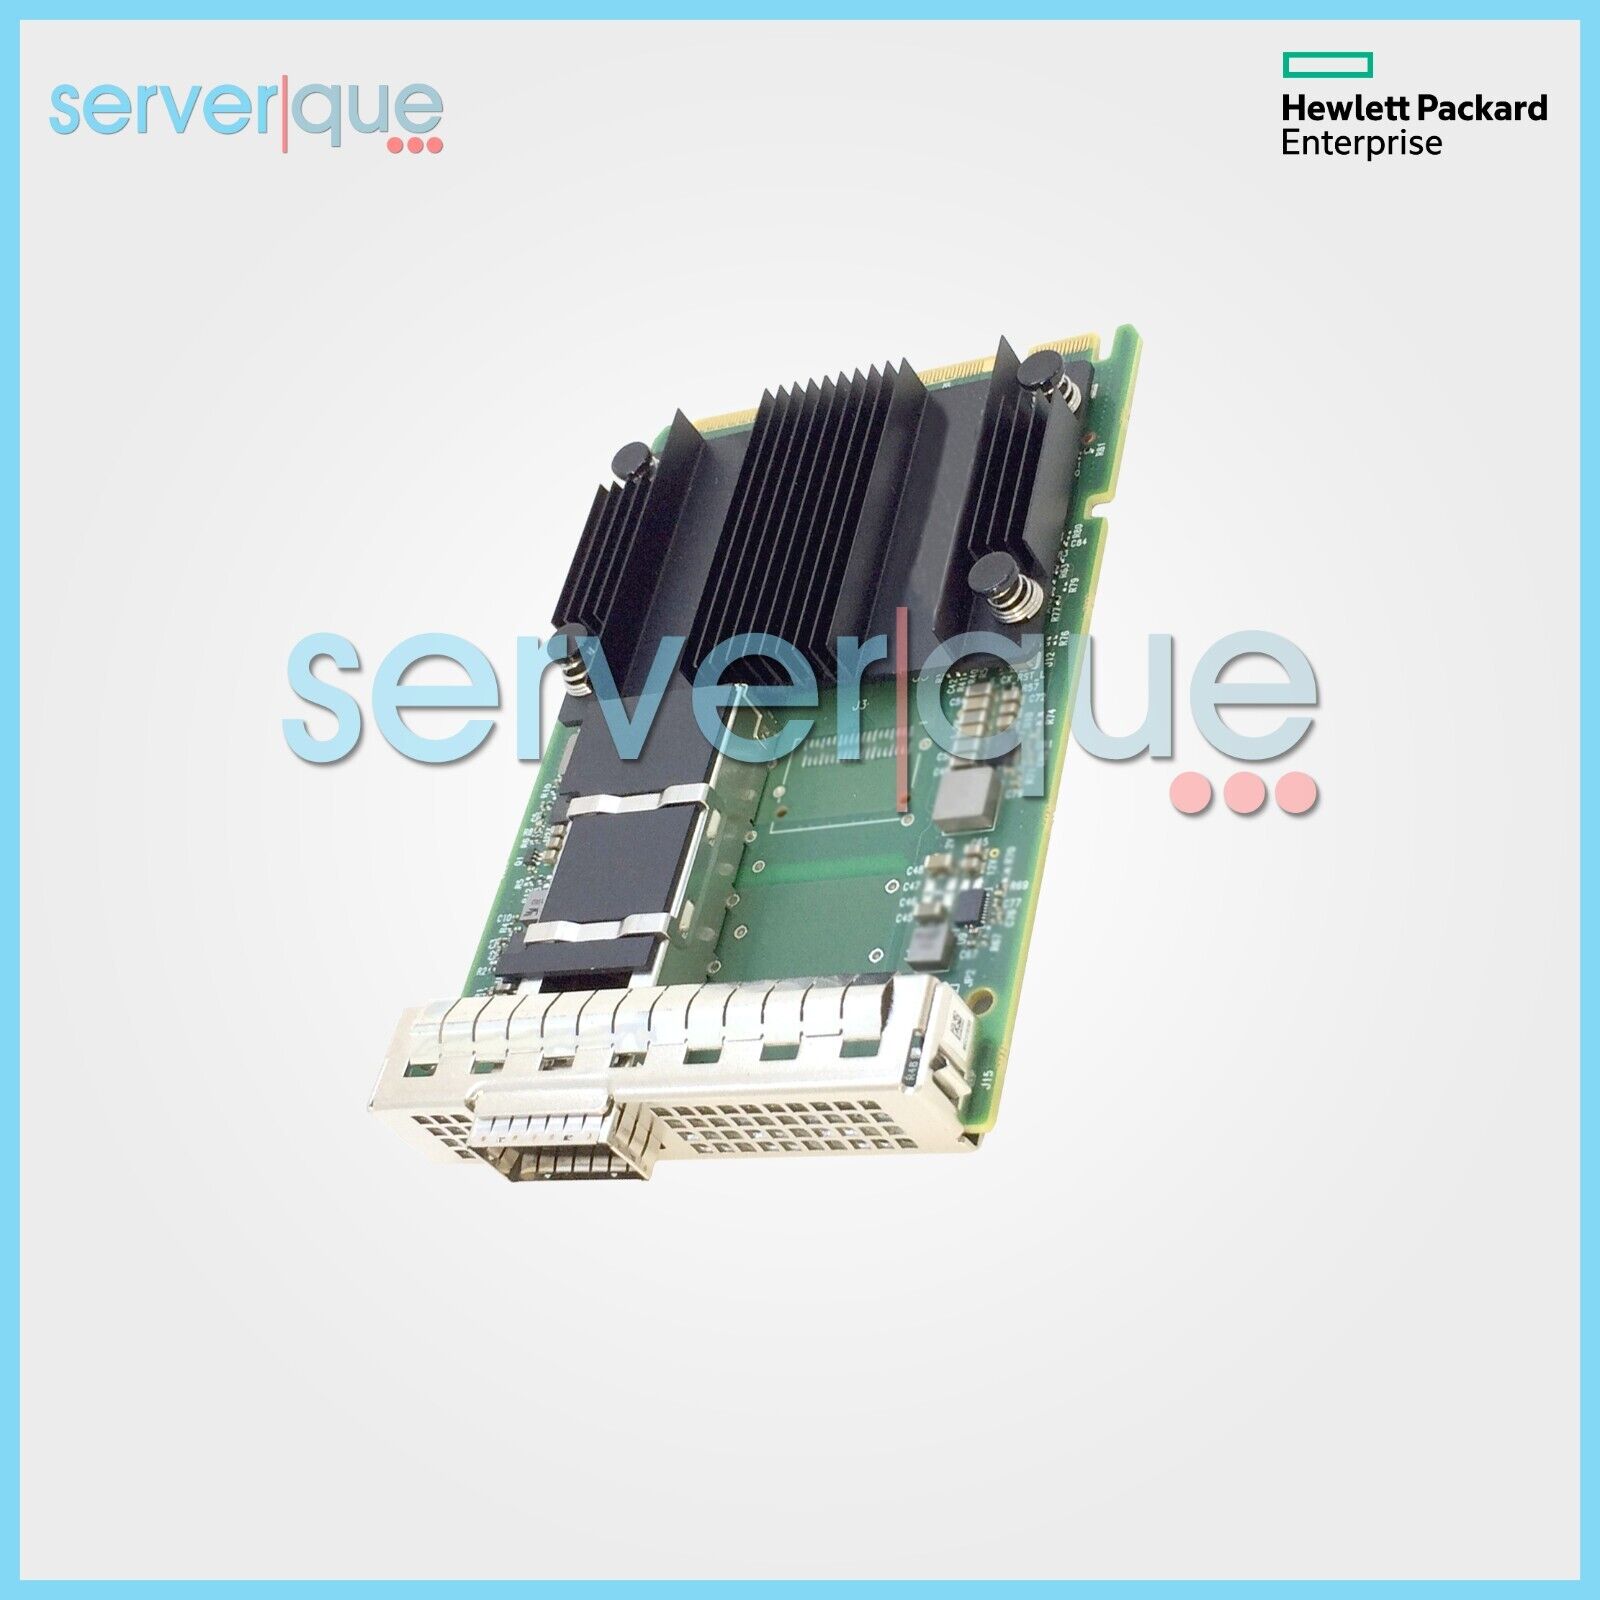 P31323-B21 HPE InfiniBand 1-Port 200Gbps QSFP56 PCI-E 4x16 OCP3 Ethernet Adapter